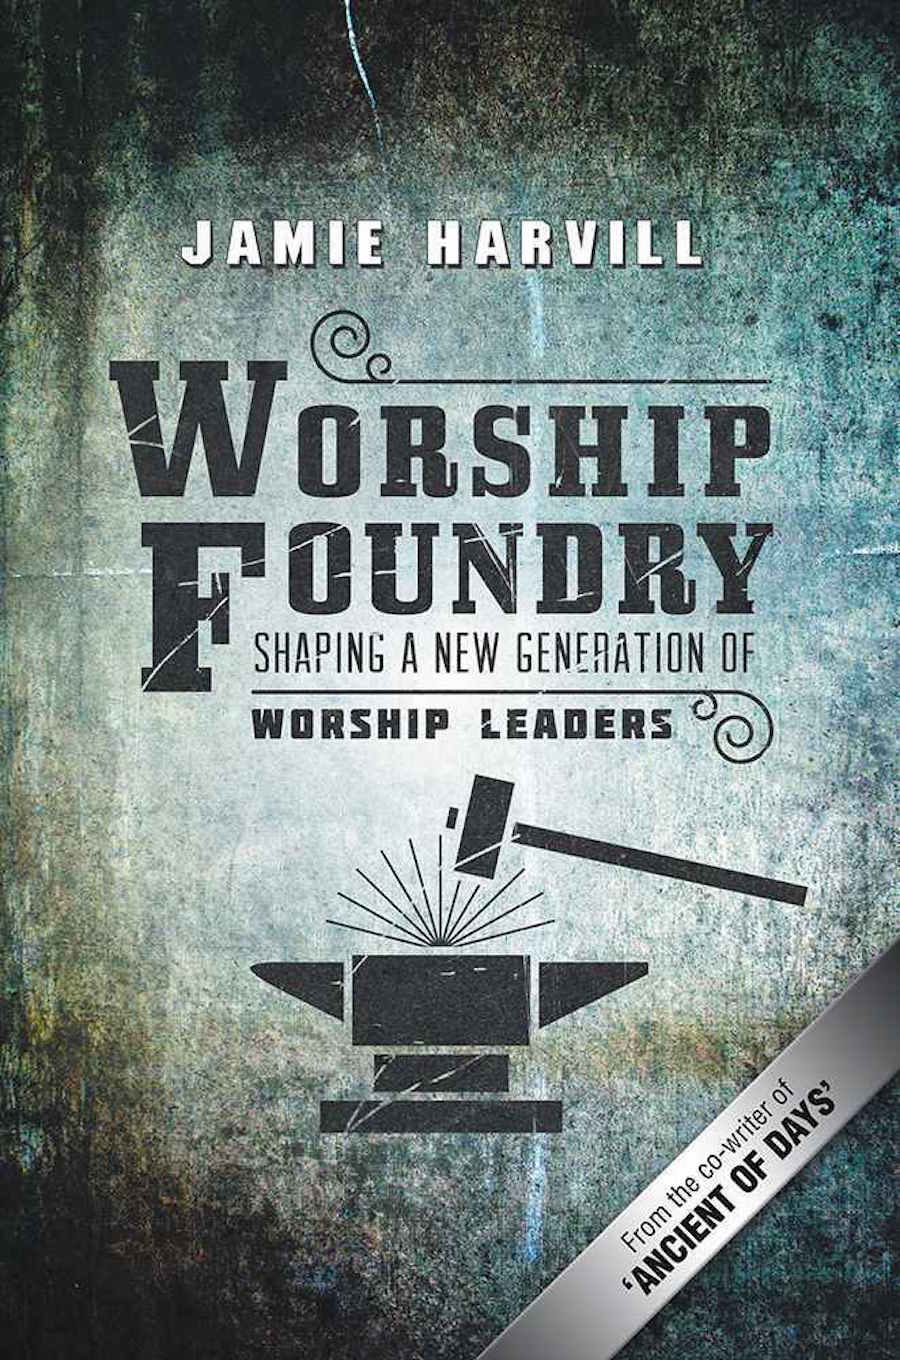 Shaping A New Generation Of Worship Leaders